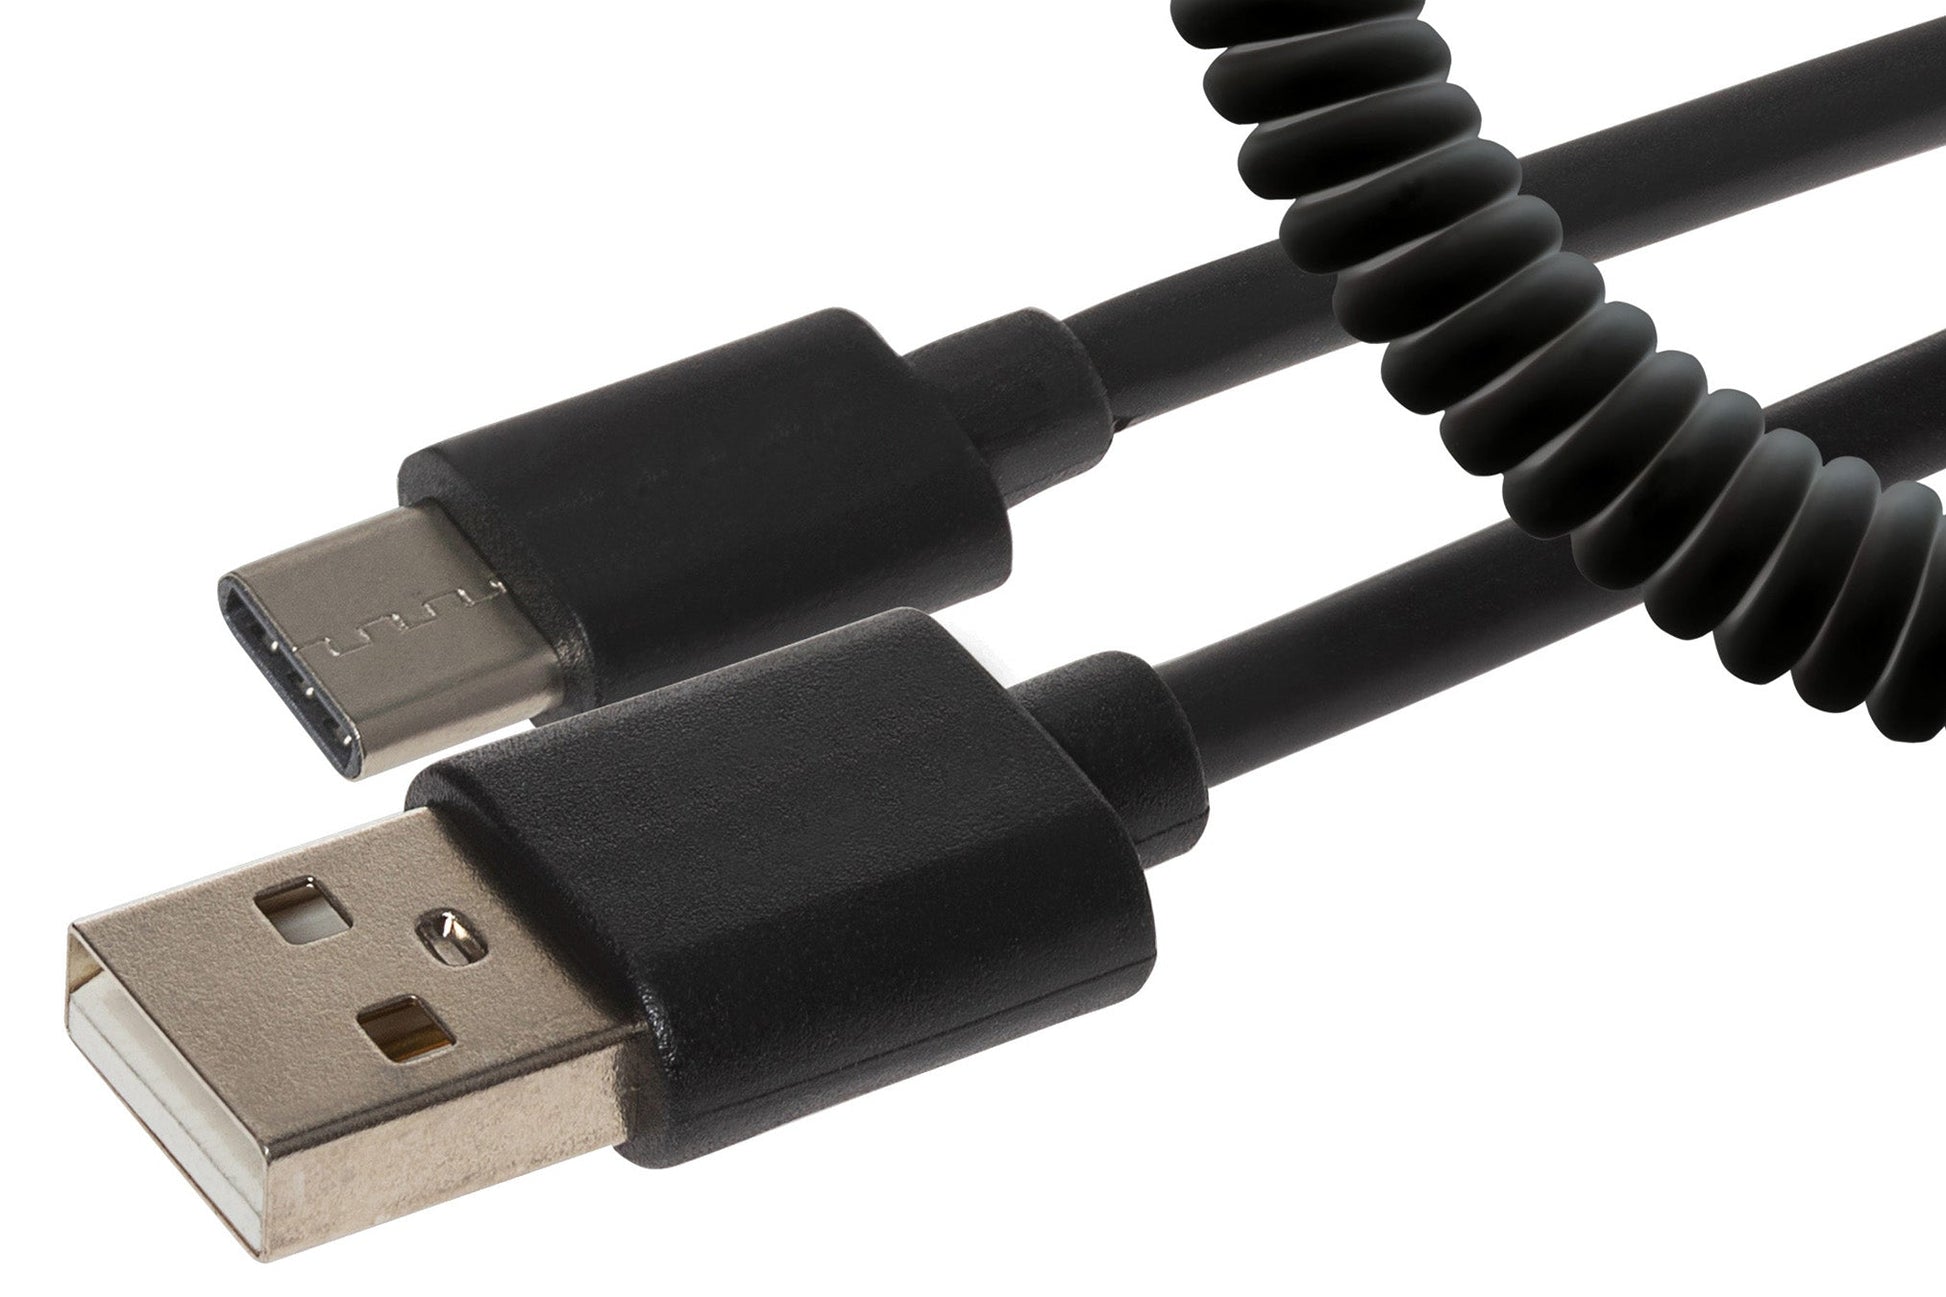 Maplin USB-A to Micro USB-B Coiled Curly Cable - Black, Extends to 1m - maplin.co.uk